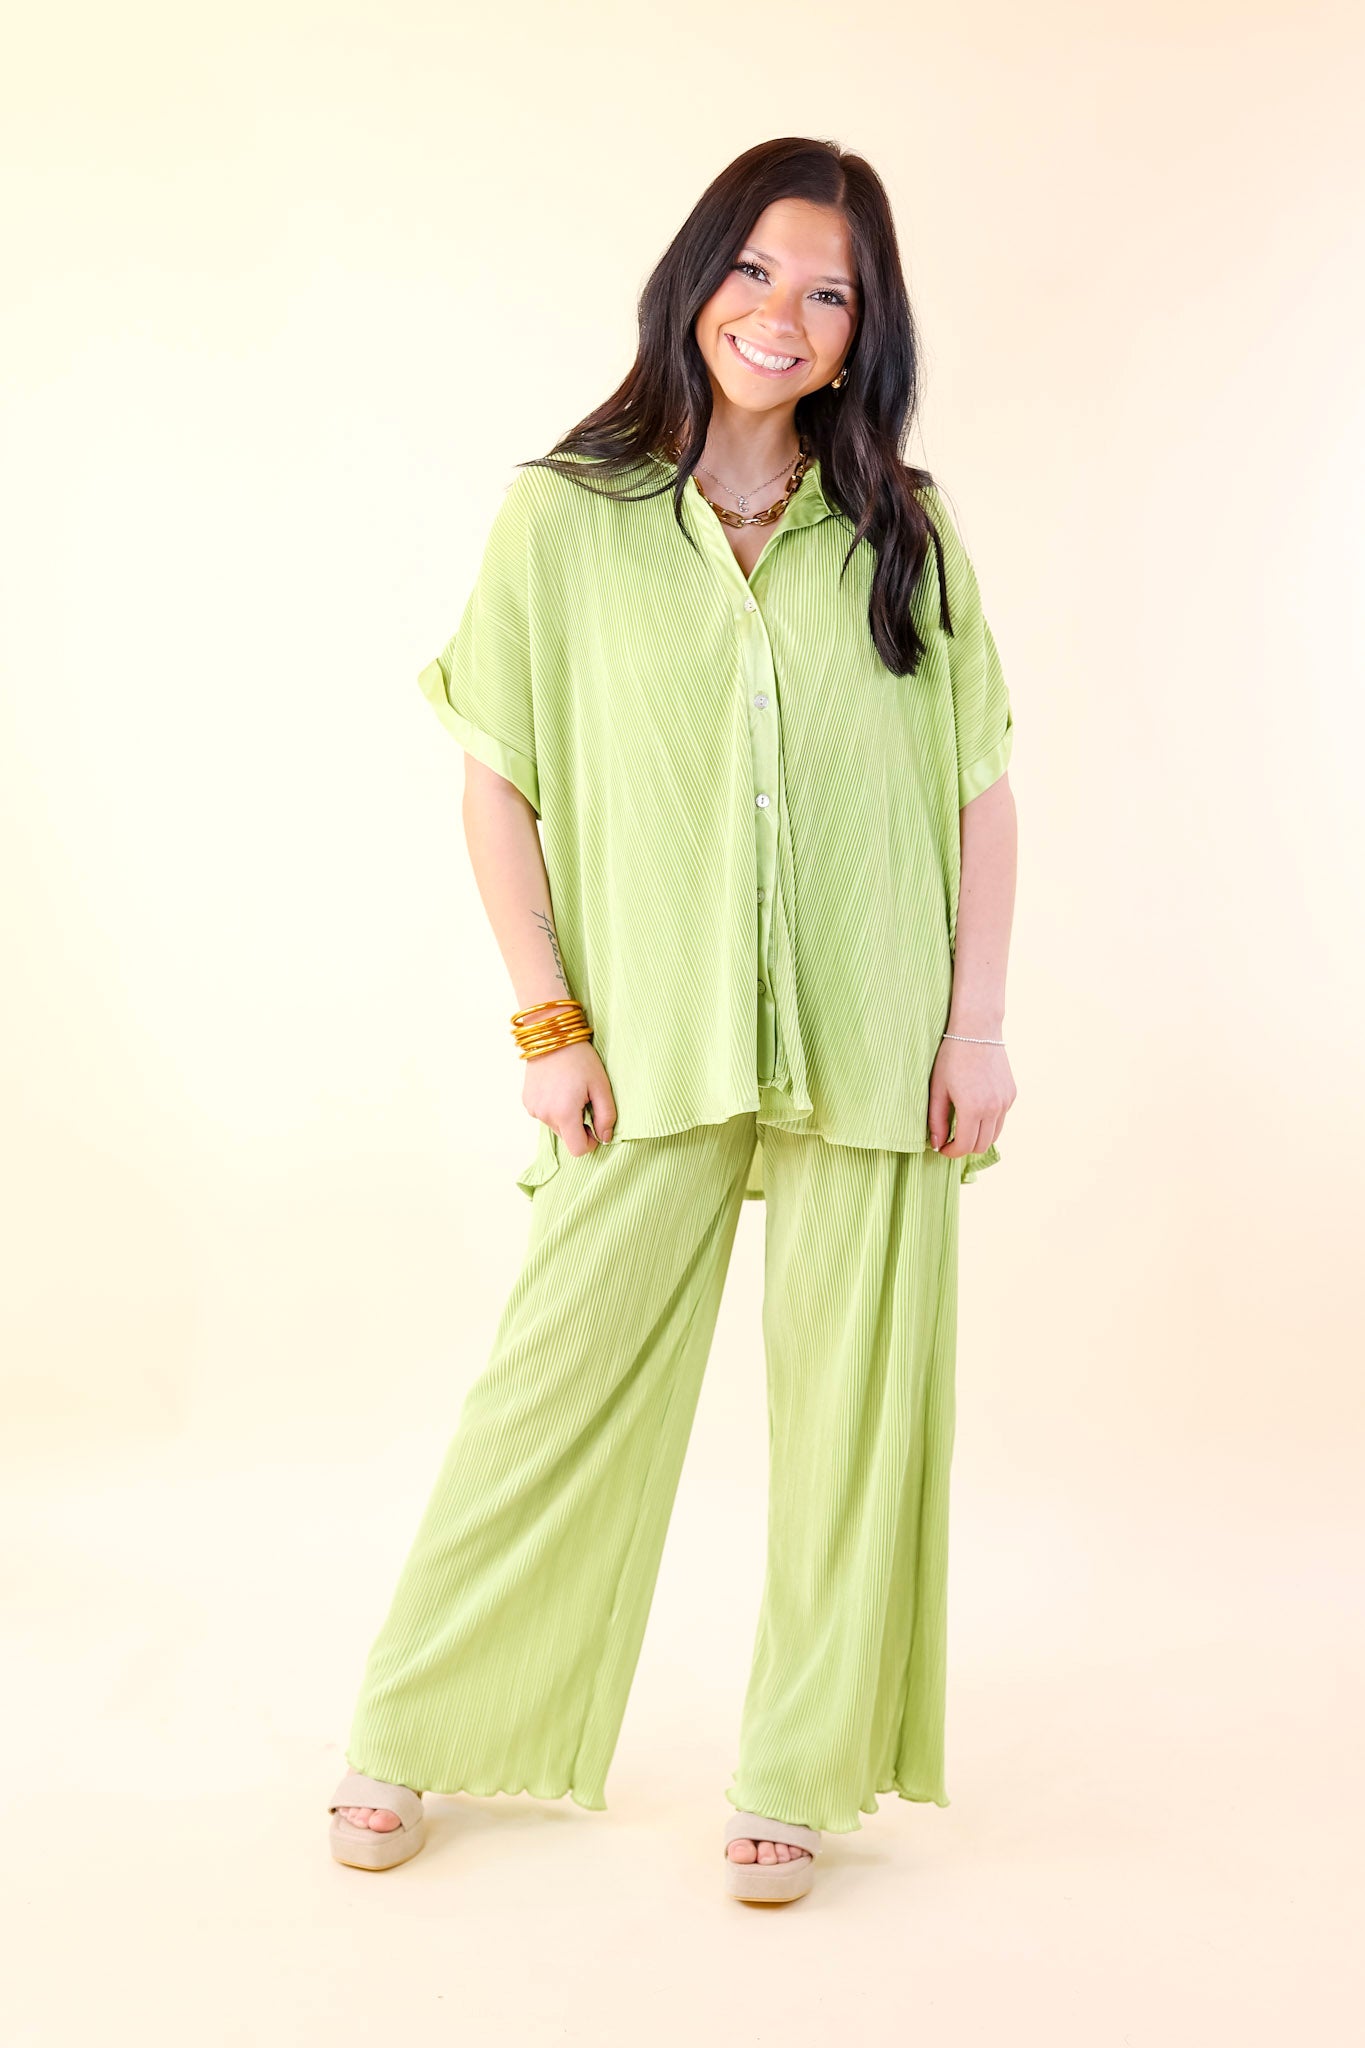 Walking In Paradise Plissé Drawstring Pants in Lime Green - Giddy Up Glamour Boutique